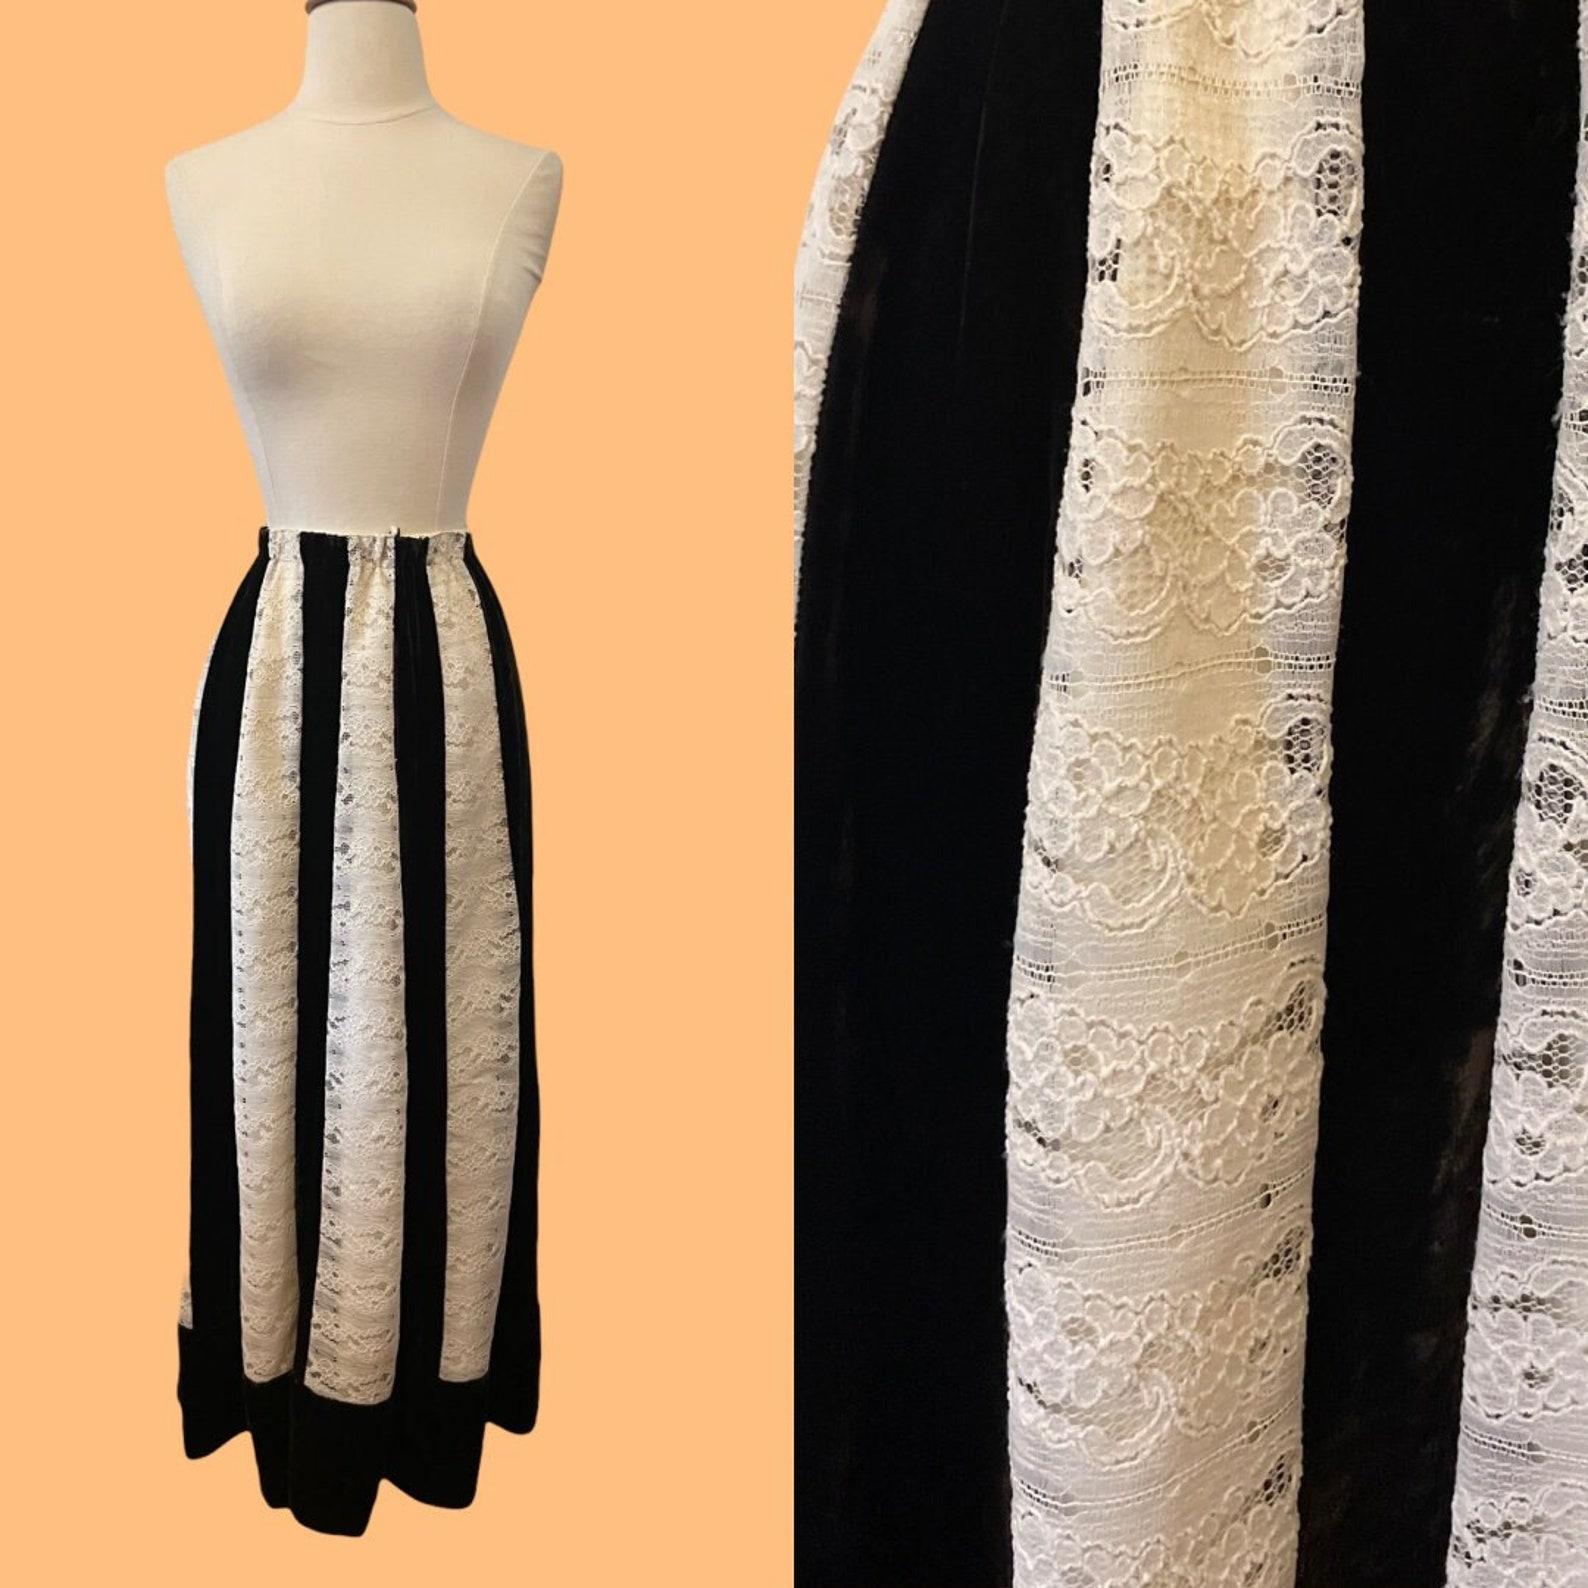 vintage 70s dark chocolate & cream maxi skirt. alternating panels of velvet and lace. elastic waist. skirt is lined. dry cleaned.

✩ This is an amazing skirt!

Circa 1970s
No Label
Brown & Ivory
Velvet and Lace
Excellent Condition. an area of